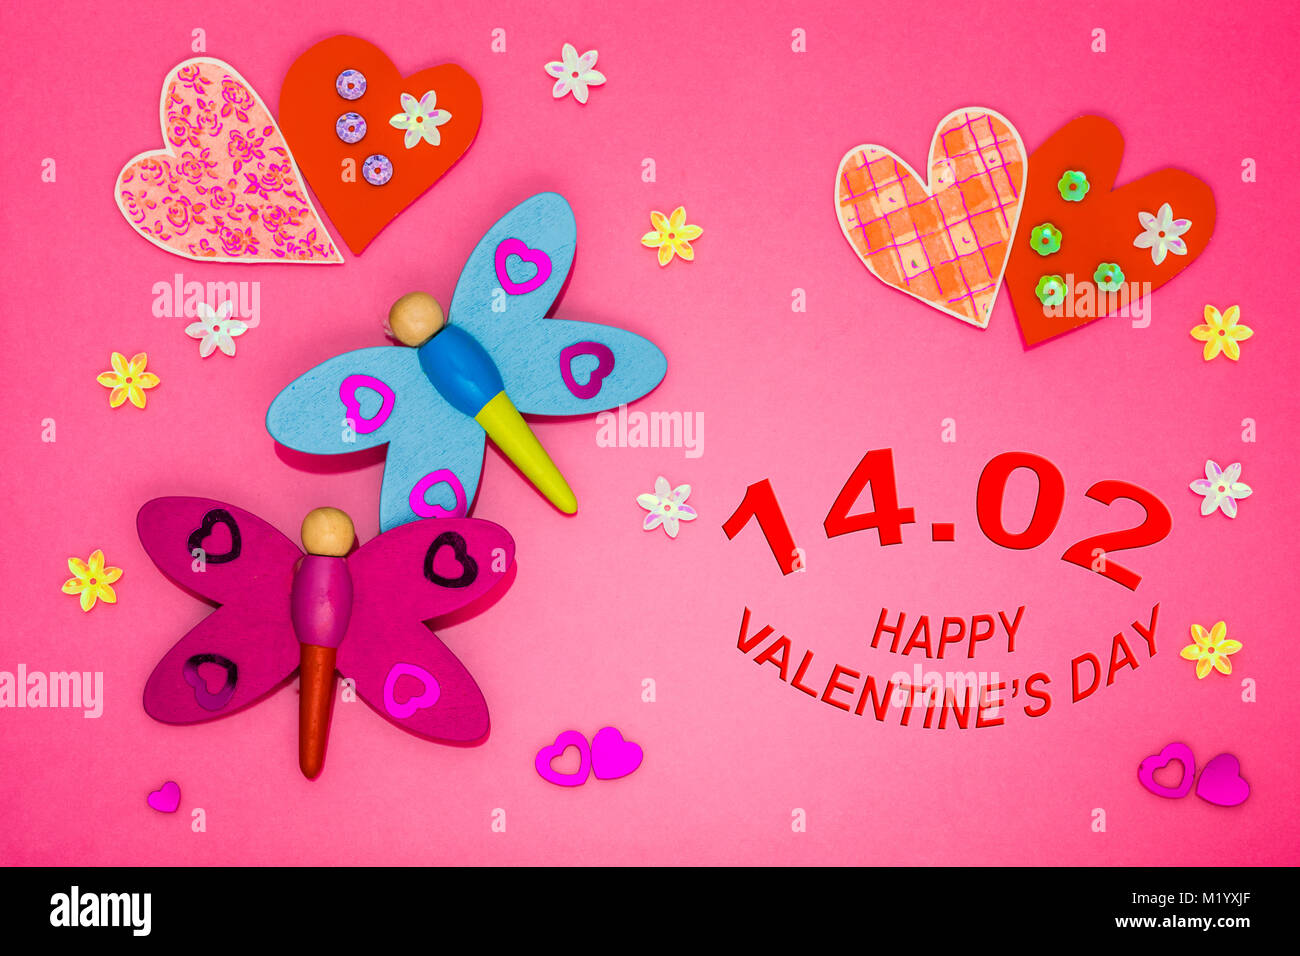 Valentines day card with hearts and dragonflies on colored background Stock Photo